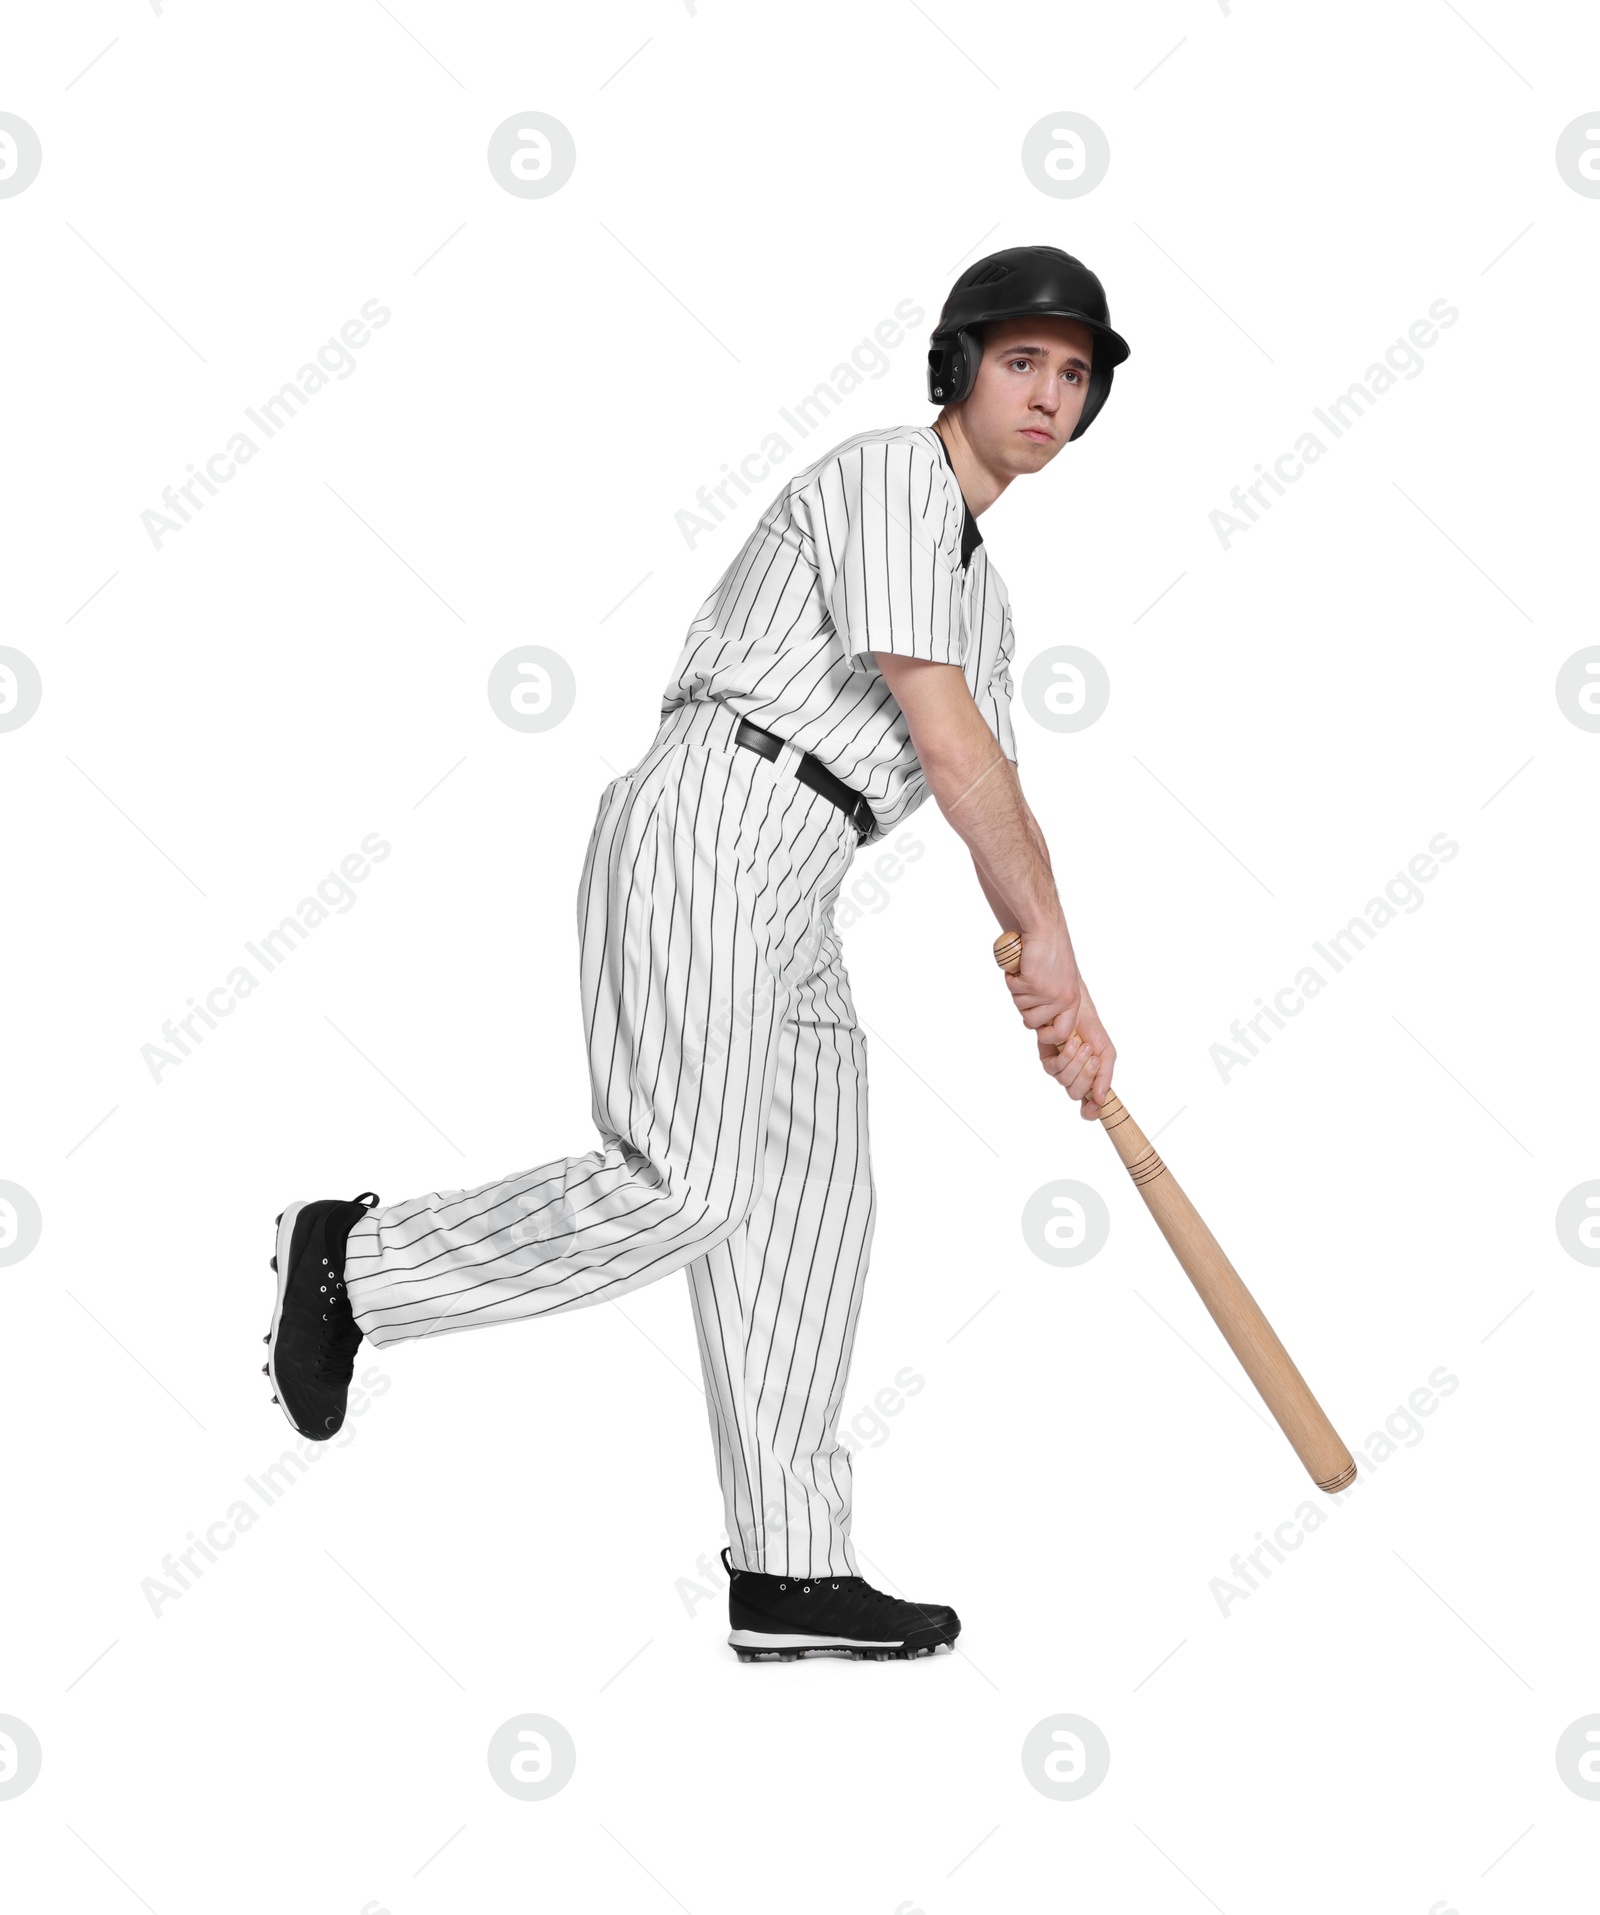 Photo of Baseball player with bat on white background, low angle view